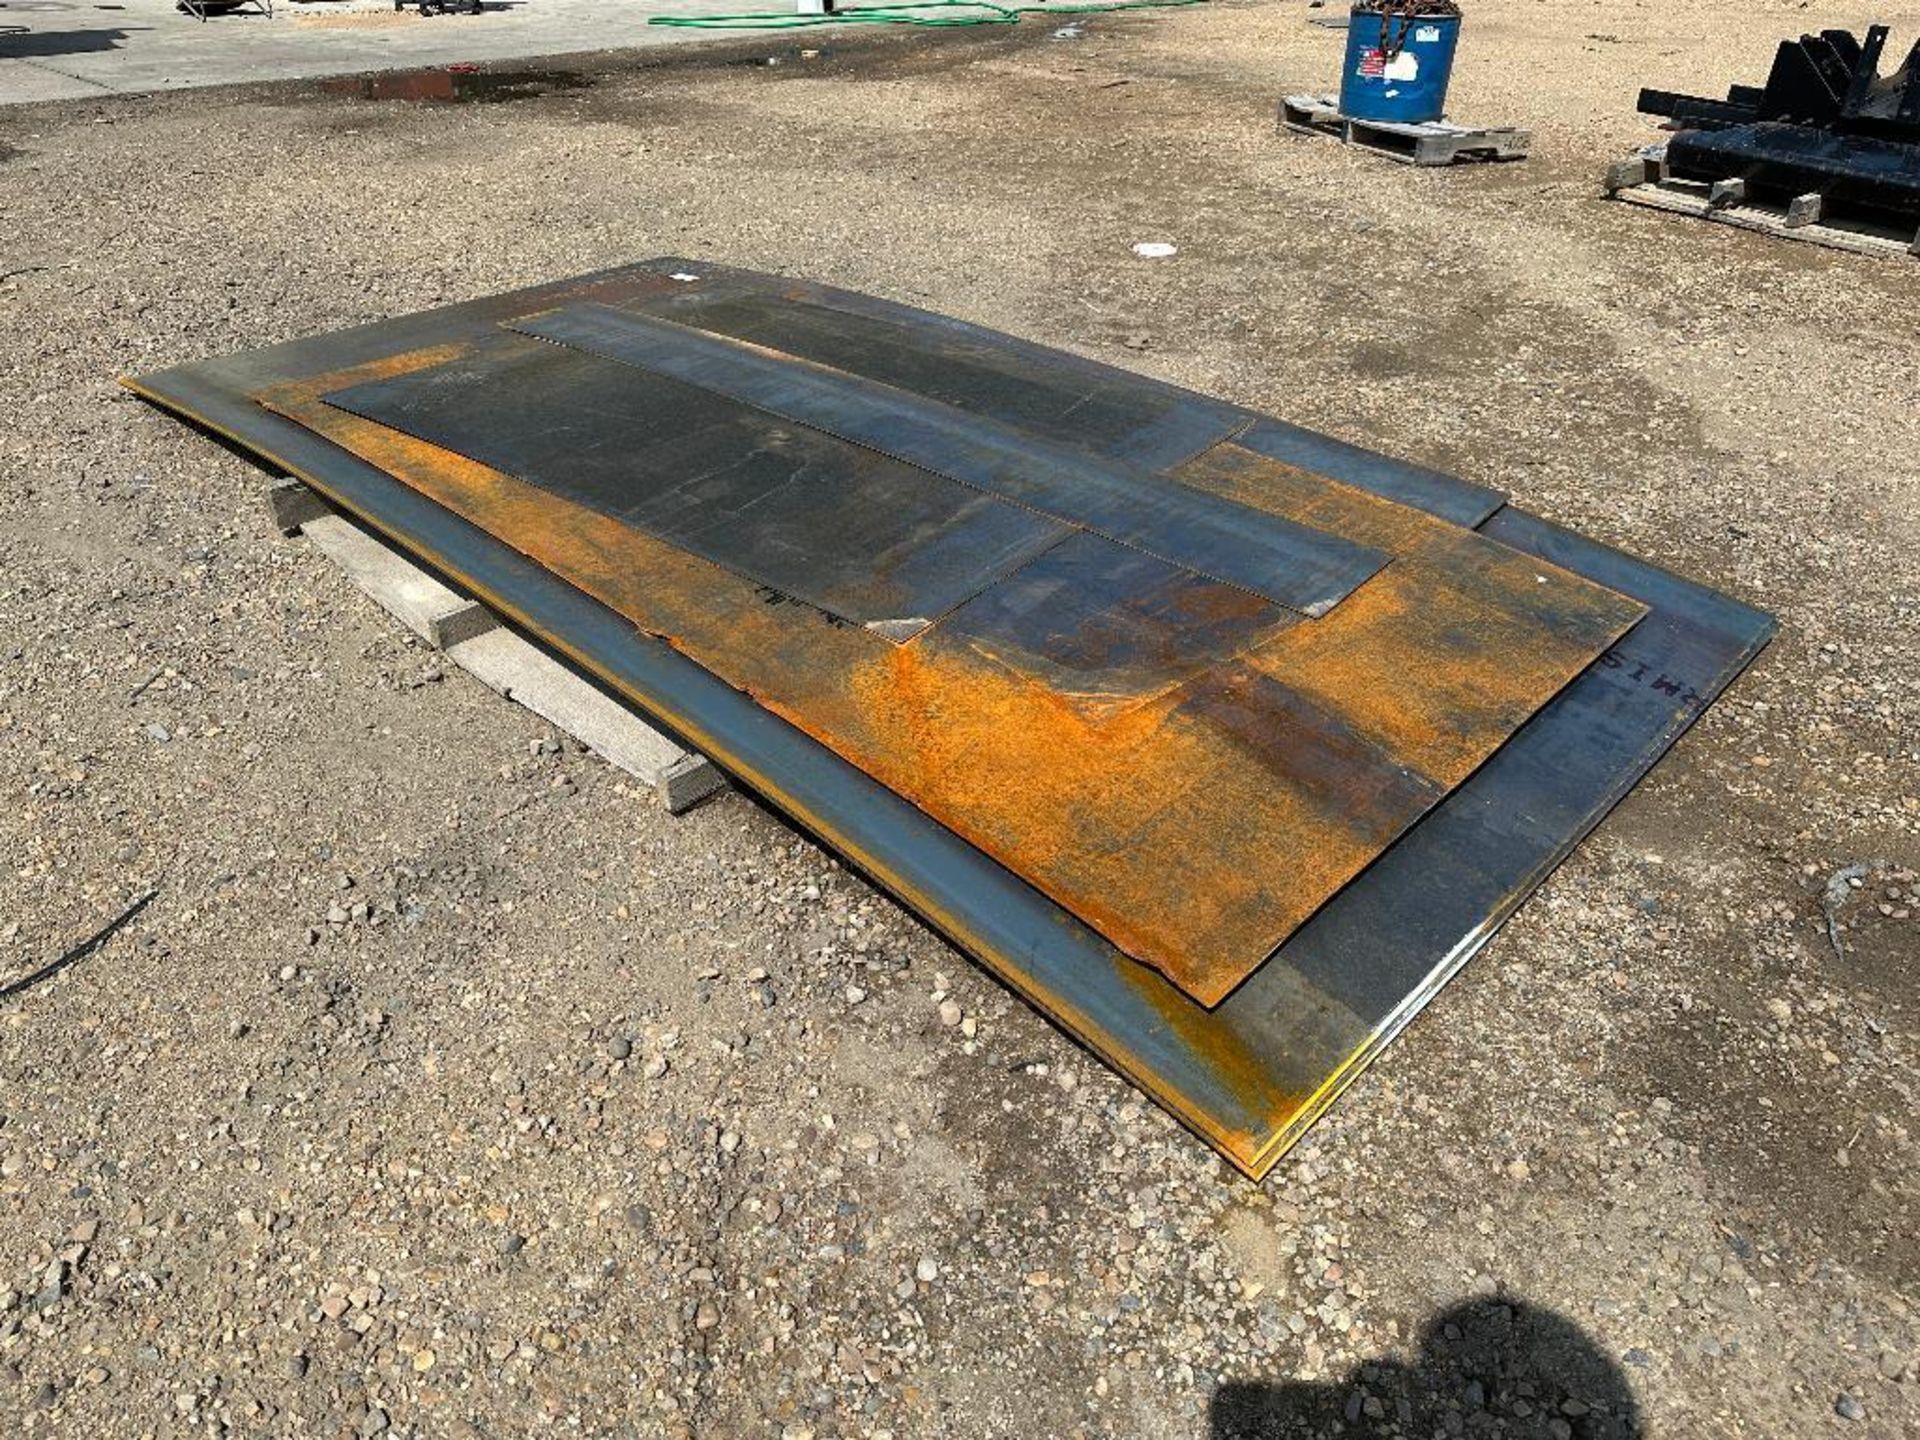 Lot of Asst. Plate Steel including (2) 5’x10’ Sheets and Asst. Cut-Offs - Image 3 of 3